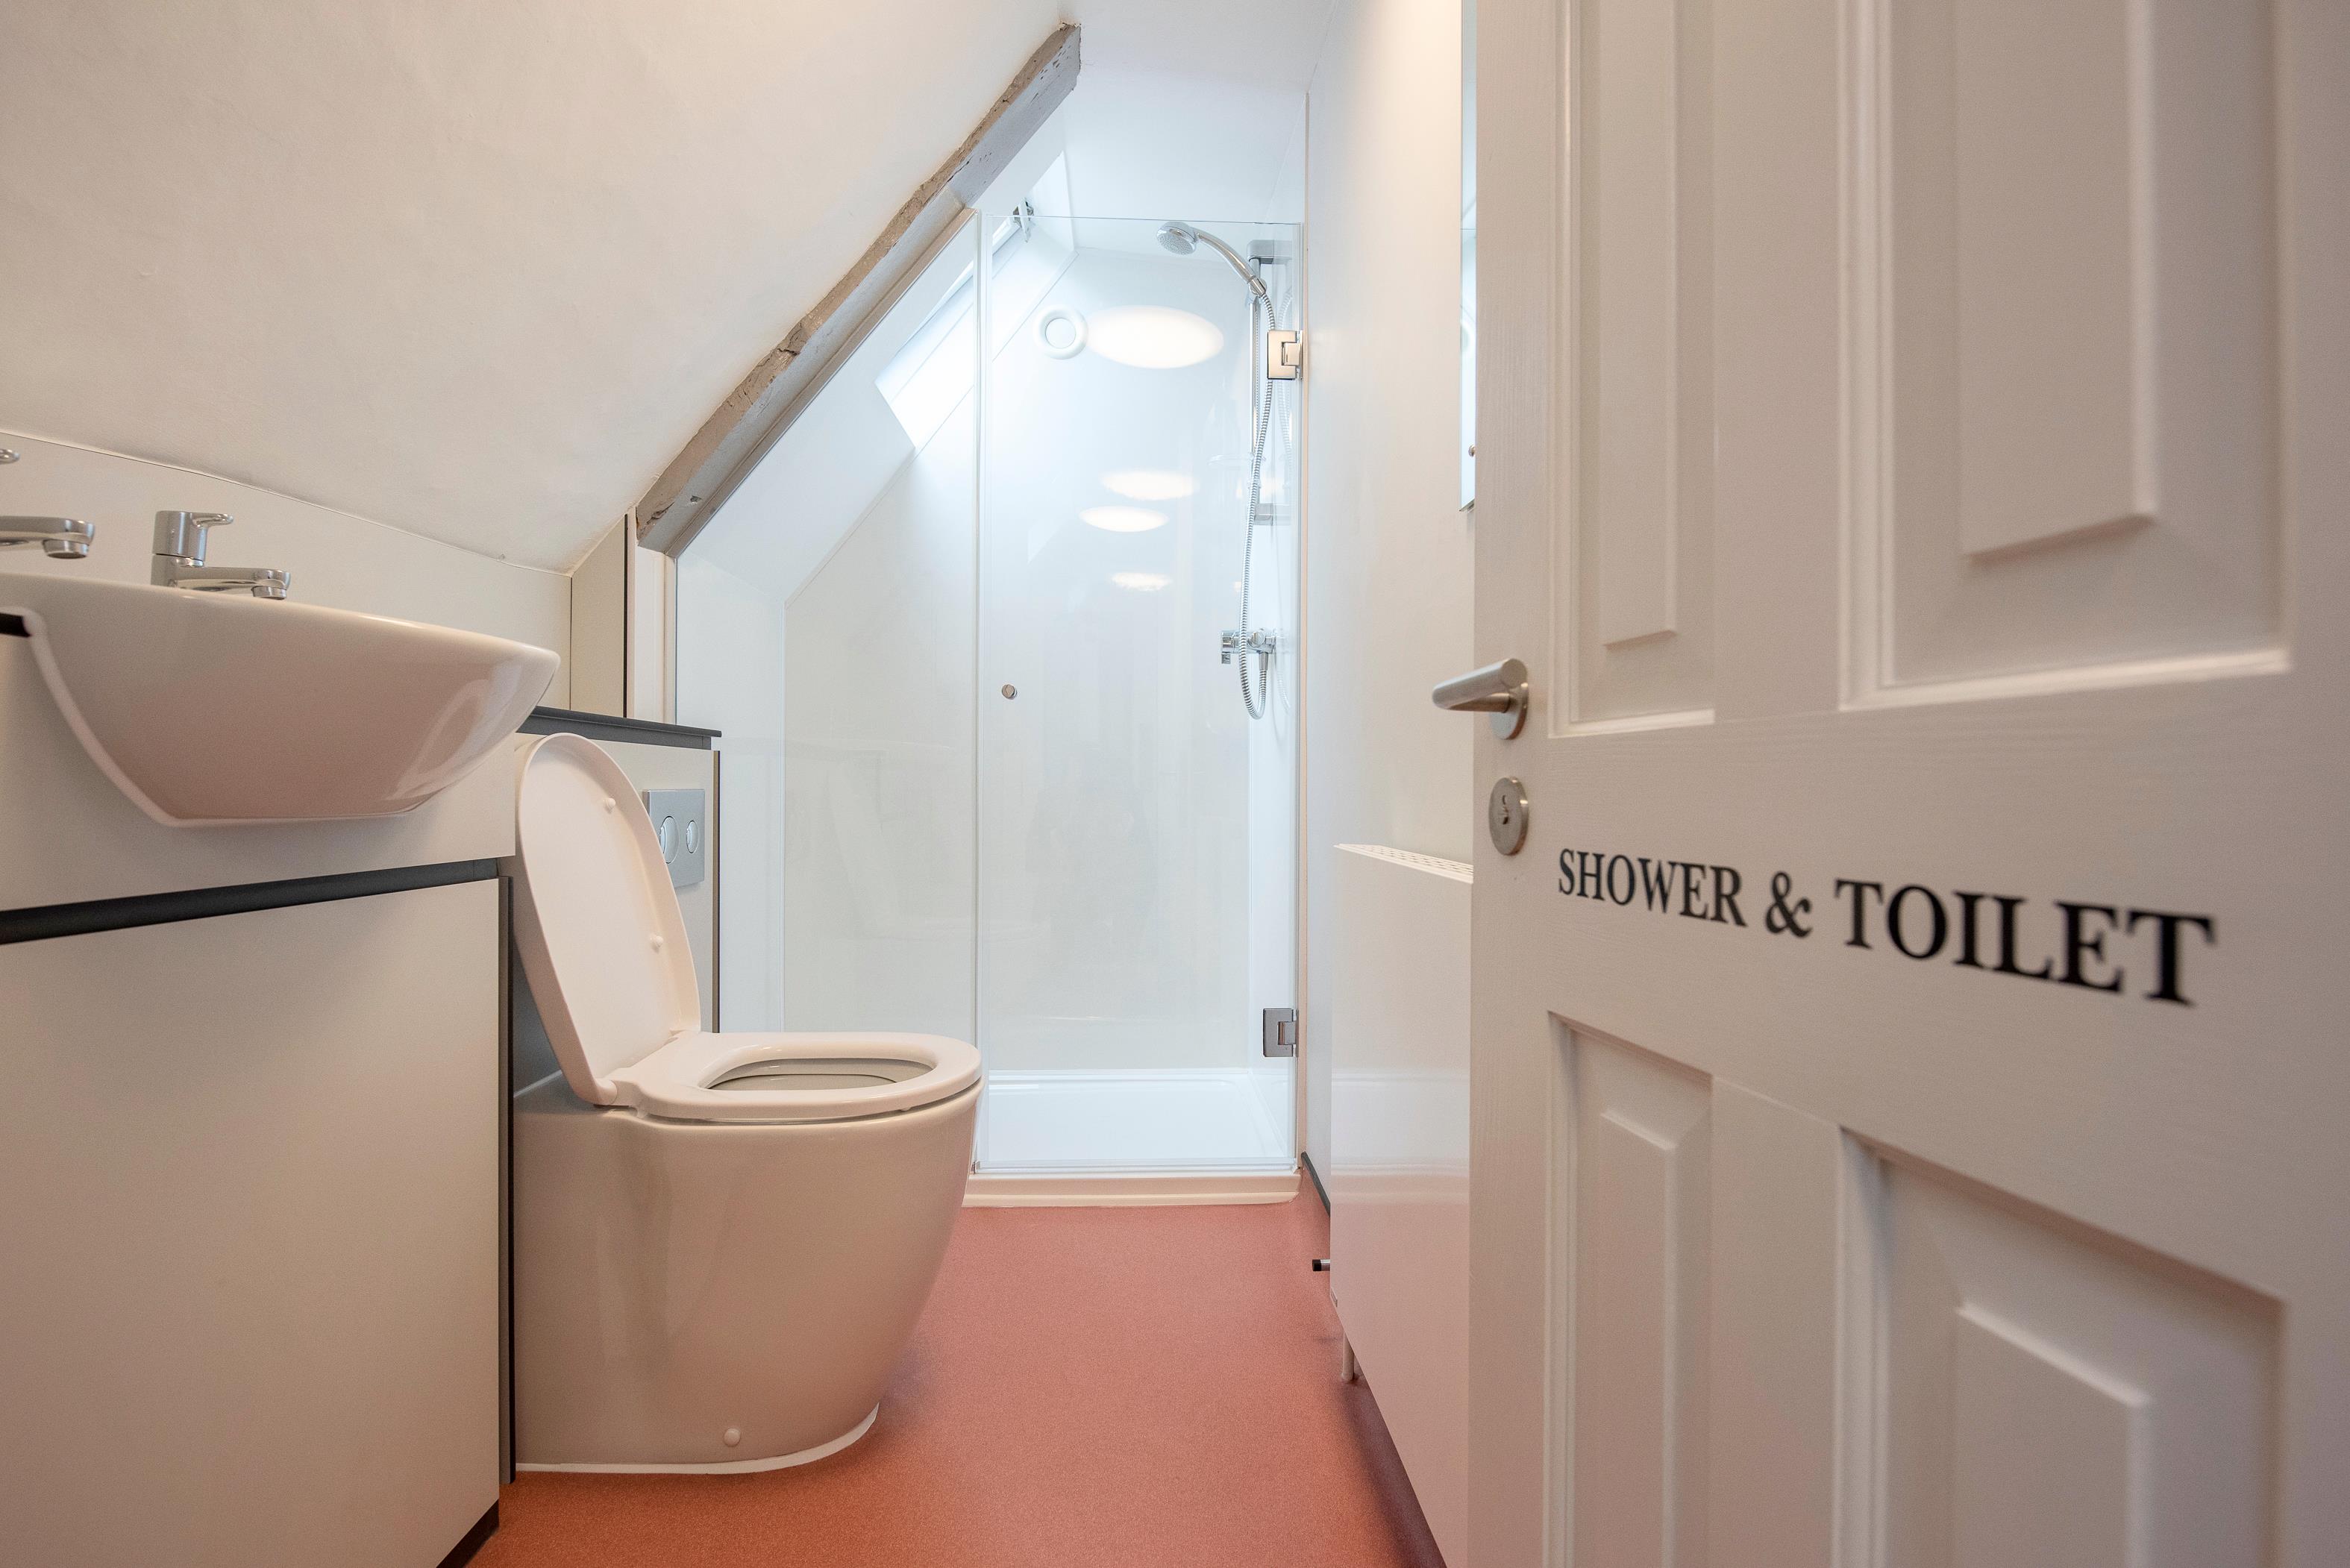 An open door with the words 'shower and toilet' painted on it. Through the door there is a sink, toilet and shower.